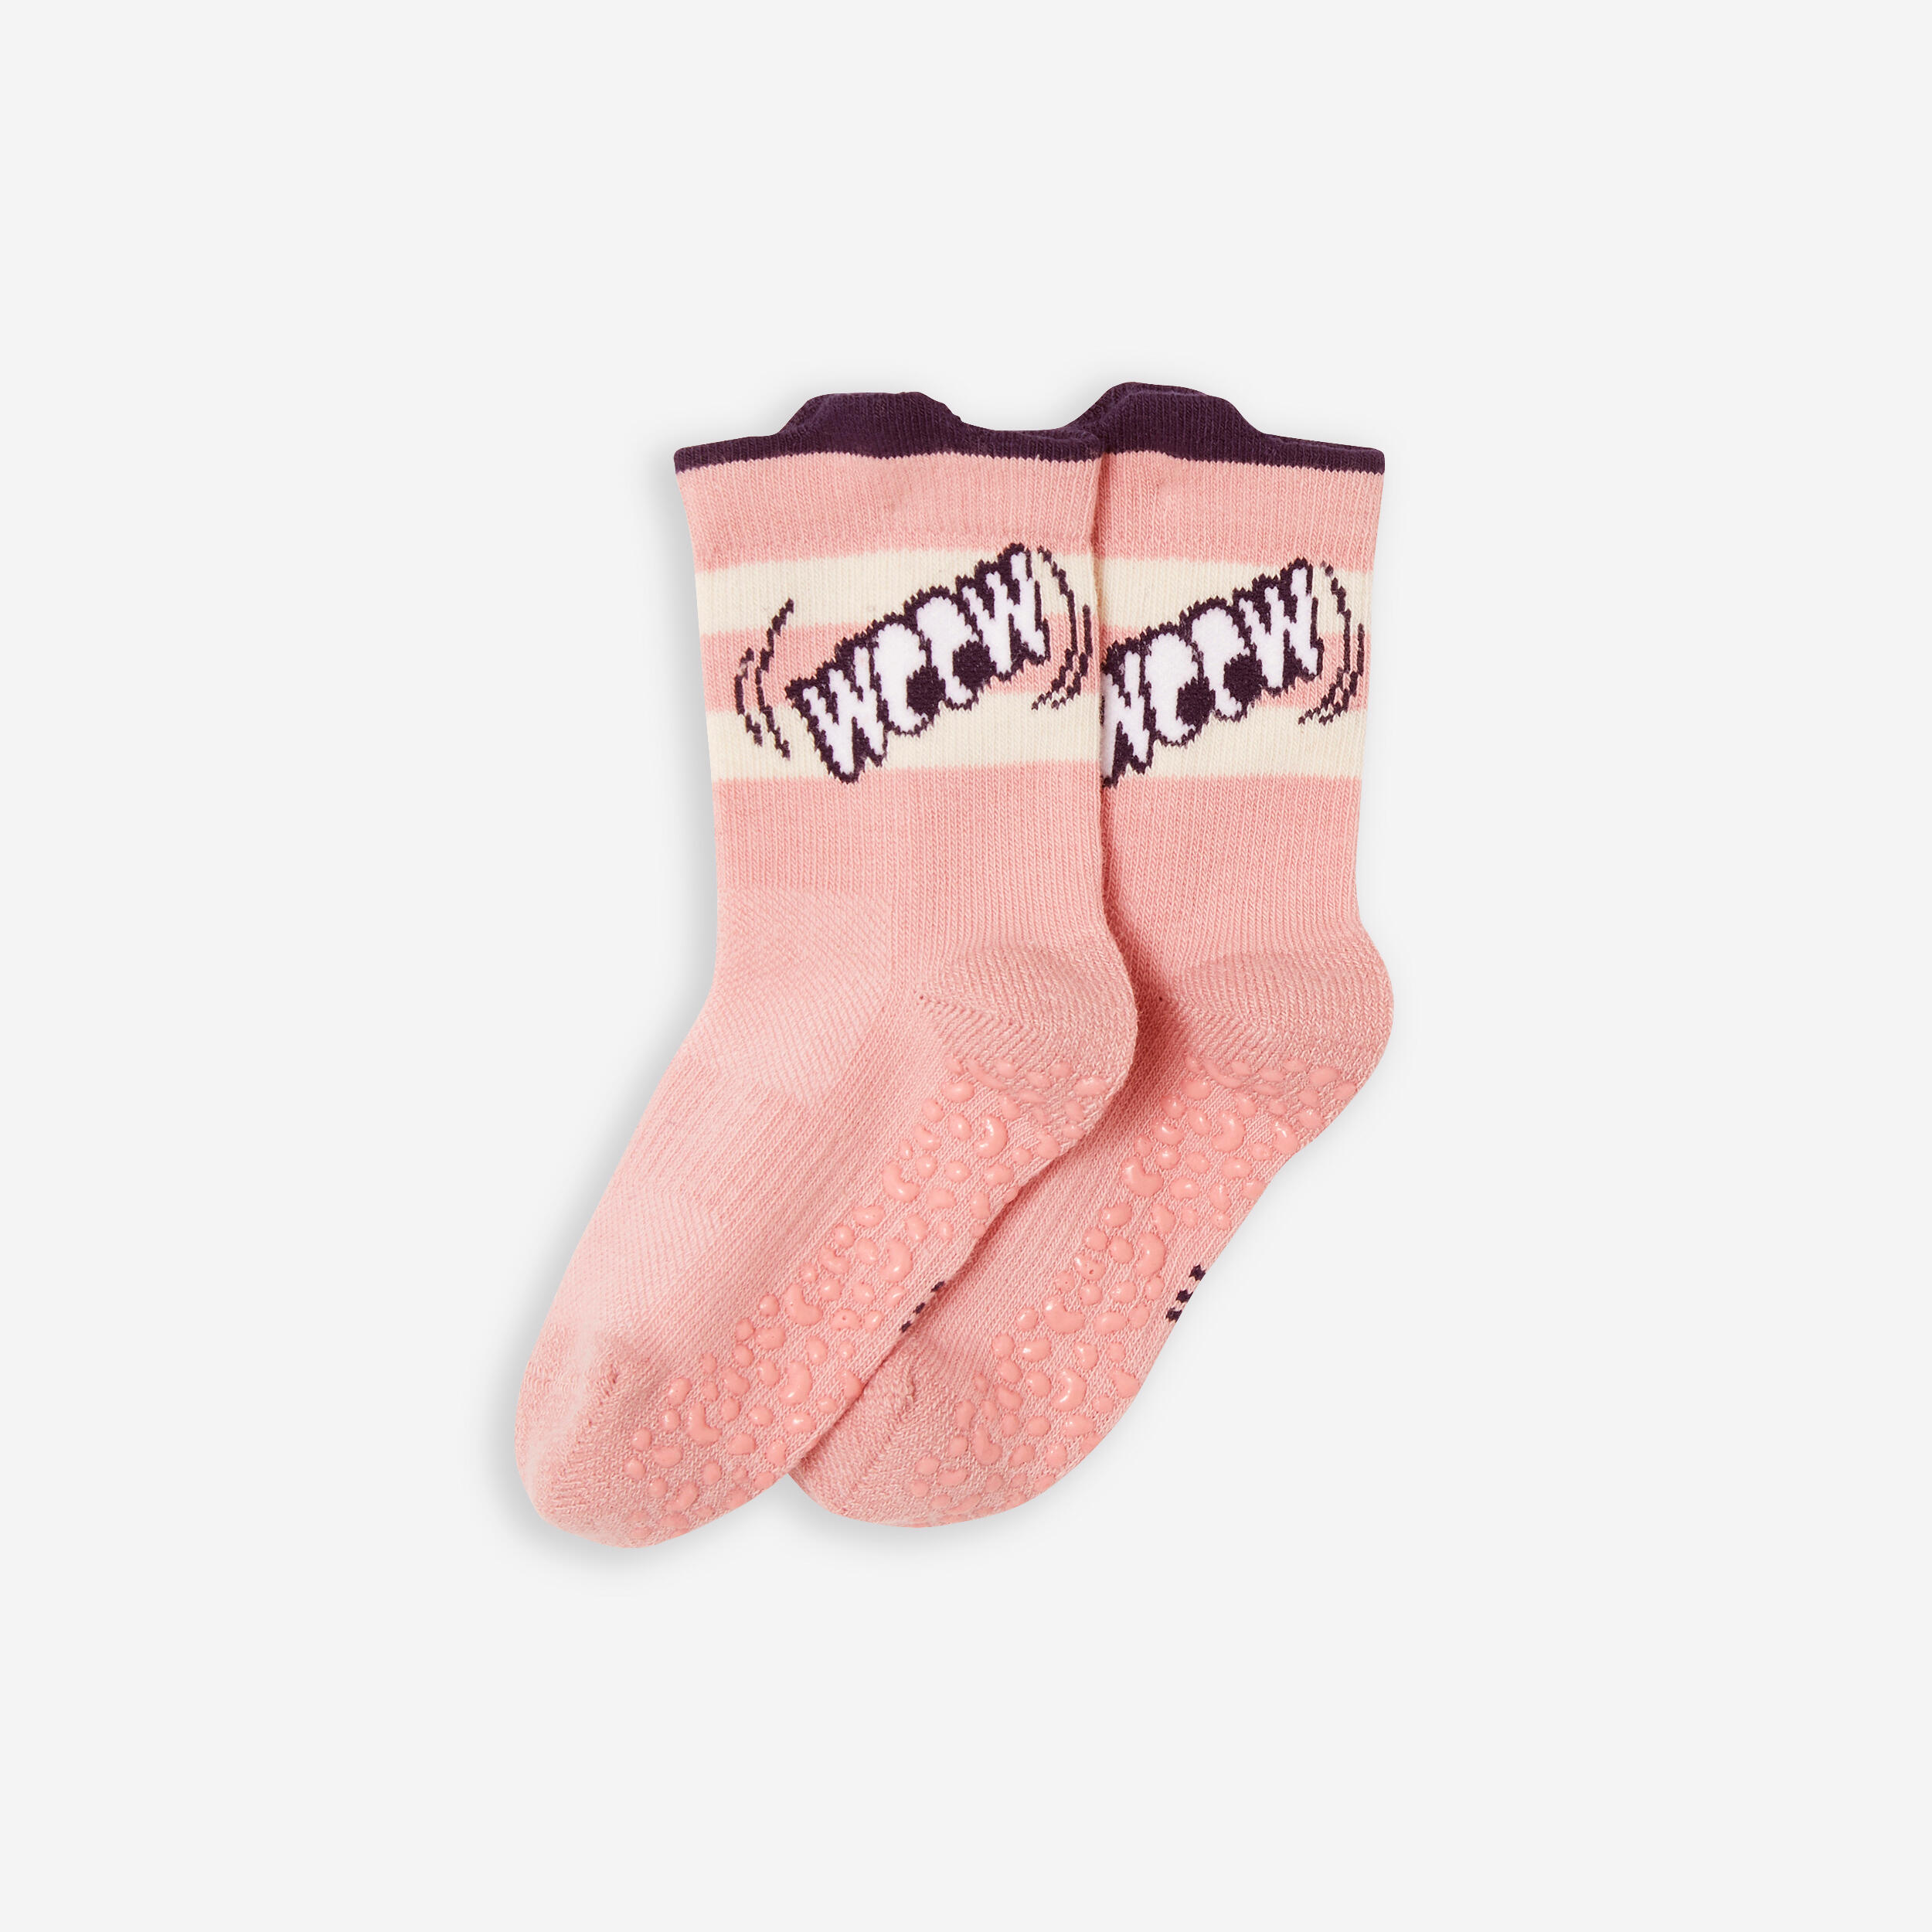 DOMYOS Kids' Non-Slip Mid-High Socks 600 - Pink with Pattern